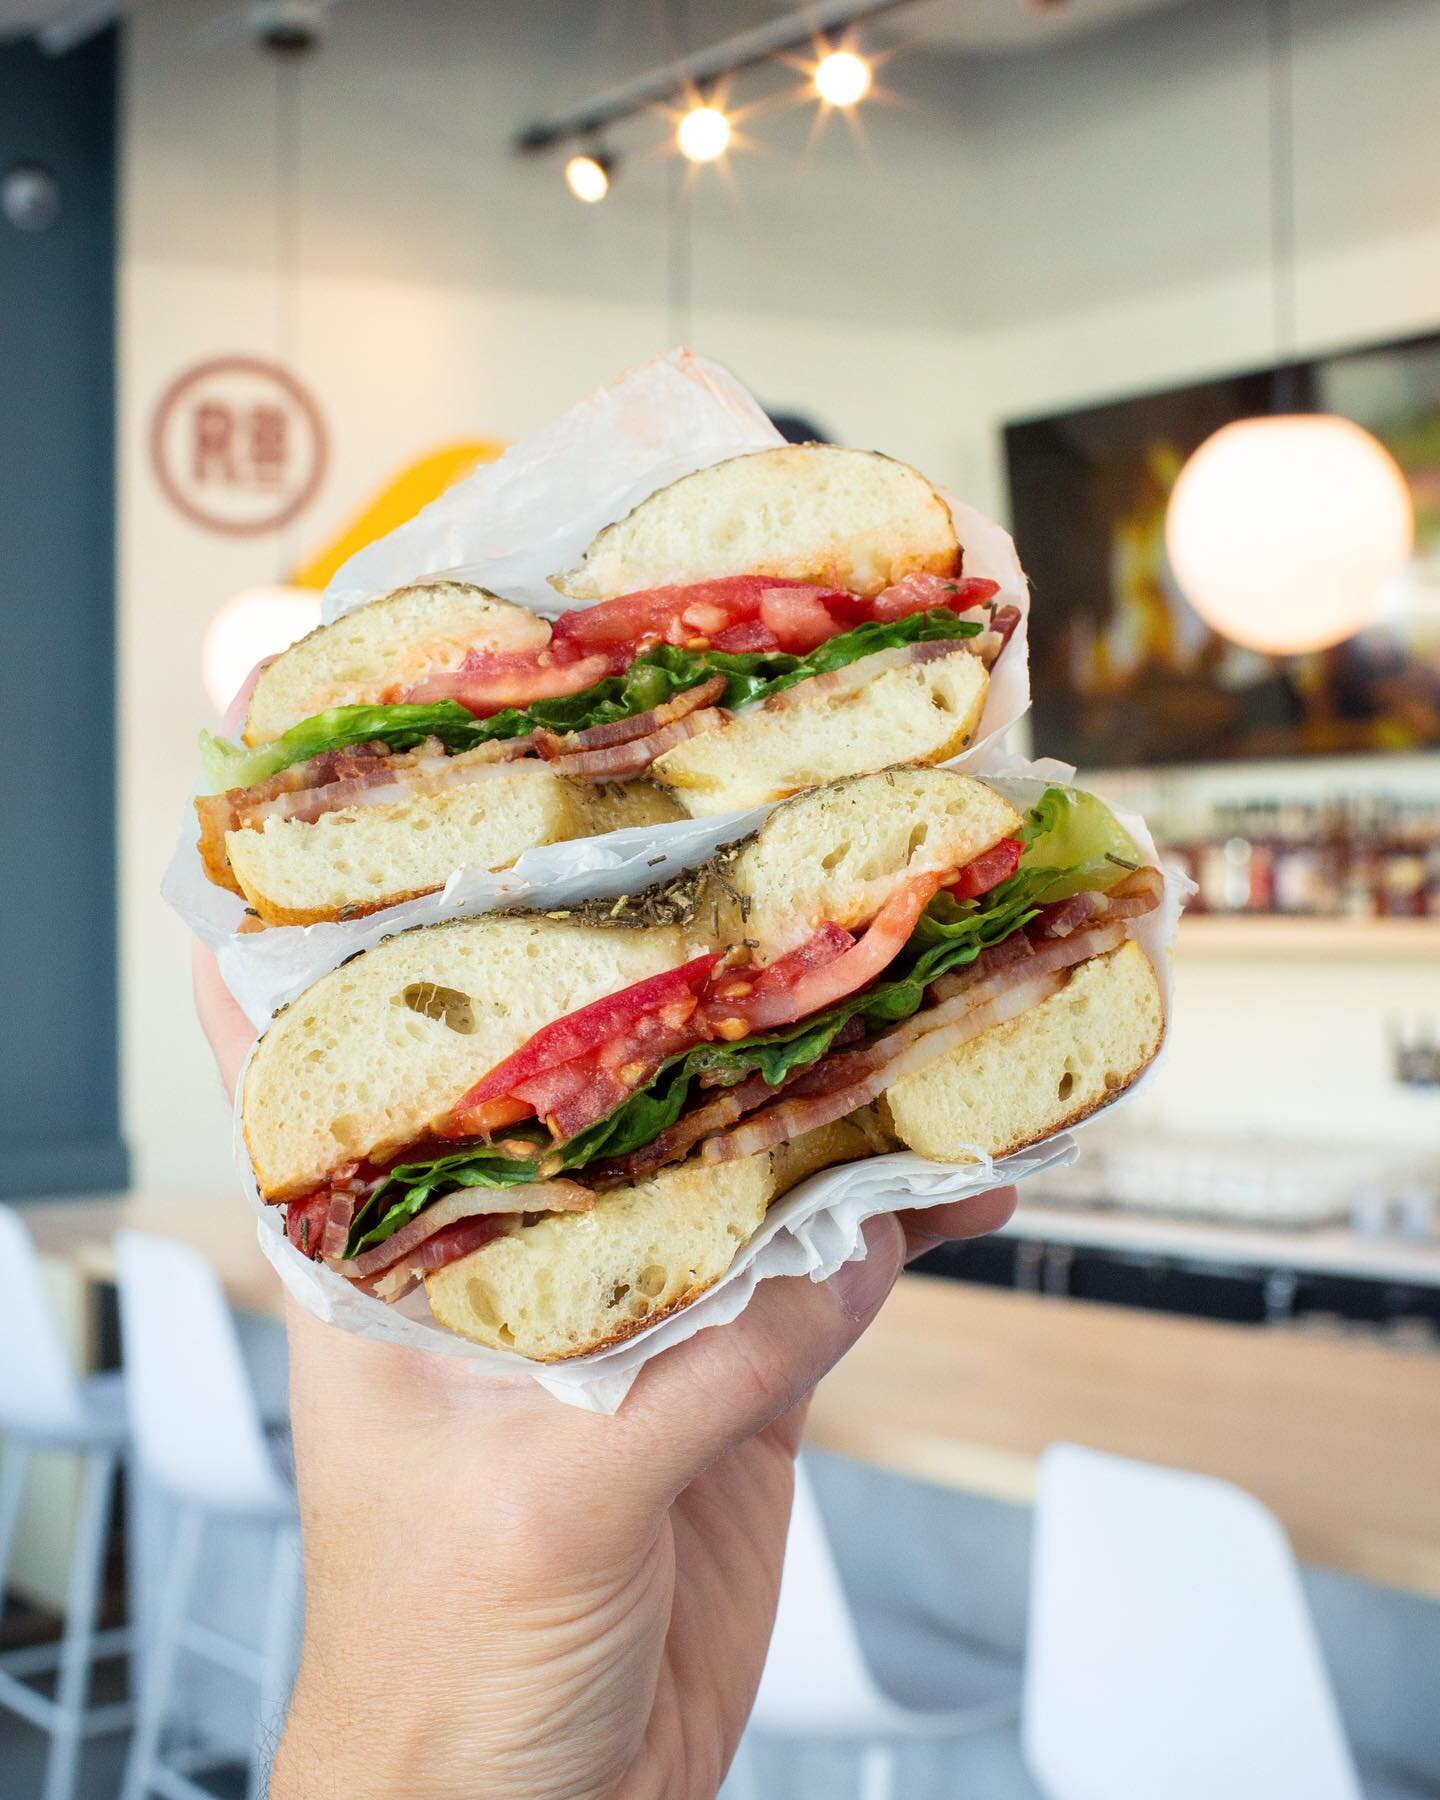 BLT but make it Bagel 🥯 These epic @rubinstein_bagels sandwiches are ready to fuel you up for a fun day in the sun. Stop by our new location in Downtown Redmond, right next to @tavolatapasta, for a breakfast or lunch sando and refreshing drink! Visi